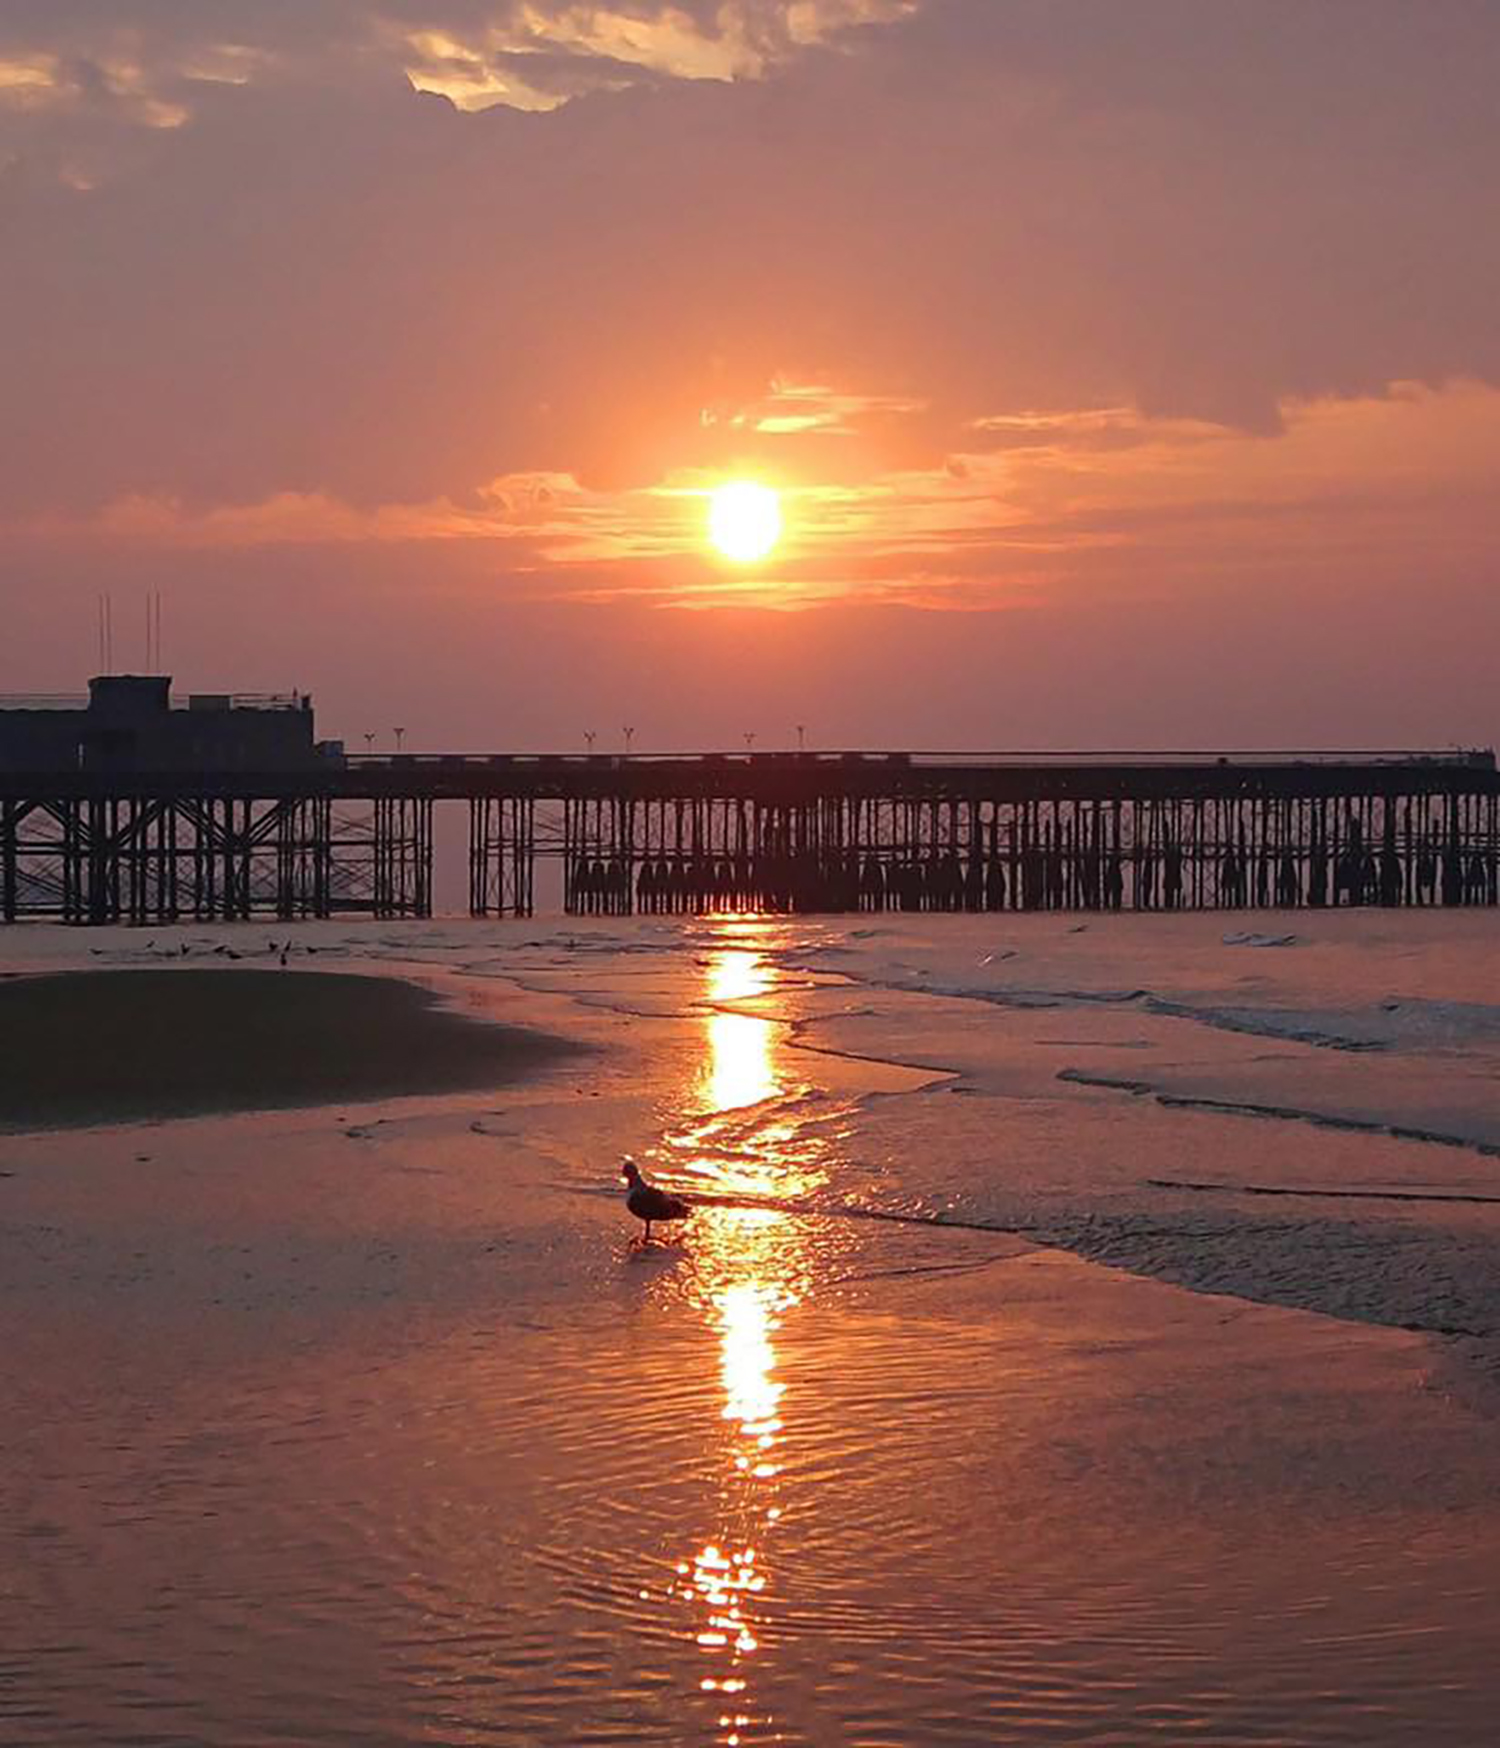 Hastings pier at sunset